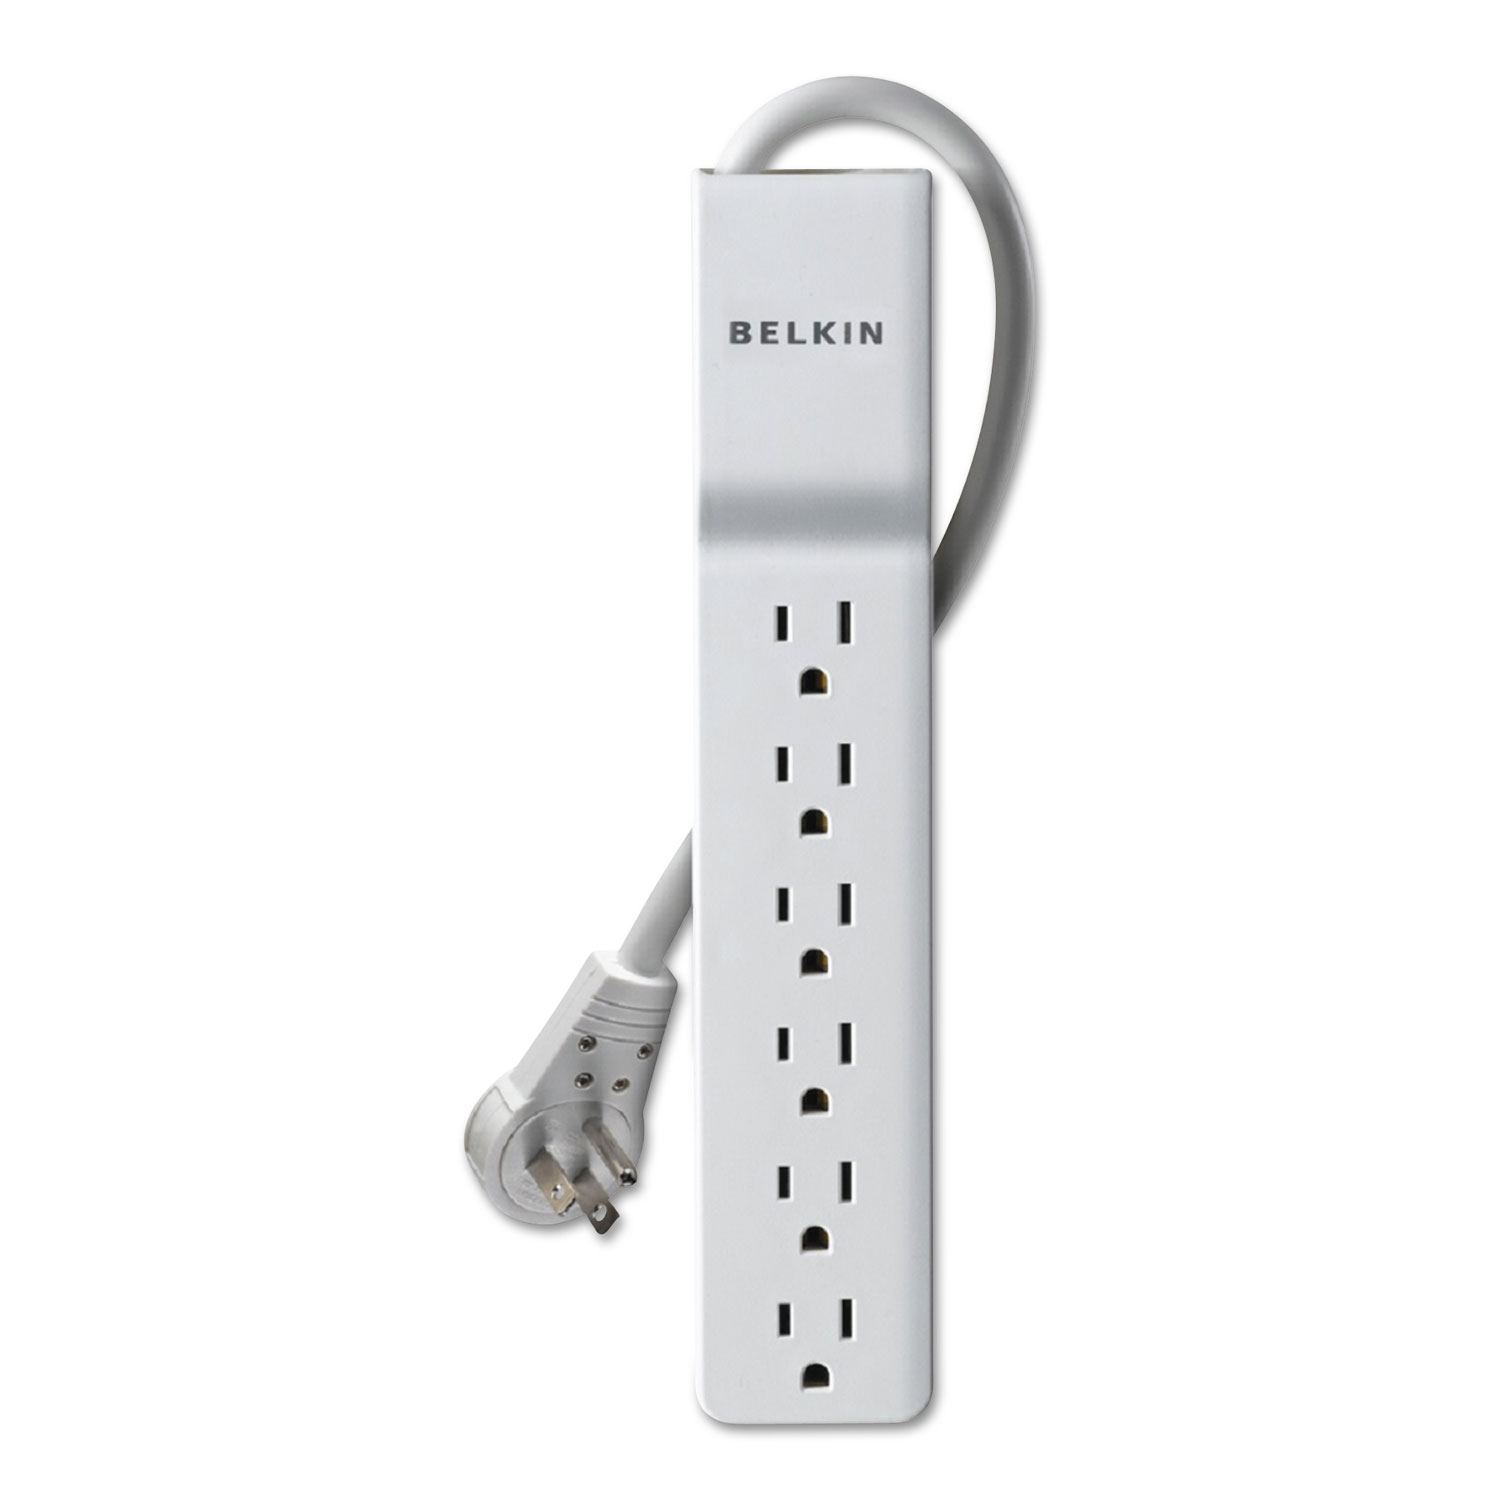  Belkin BE106000-06R Home/Office Surge Protector w/Rotating Plug, 6 Outlets, 6 ft Cord, 720J, White (BLKBE10600006R) 